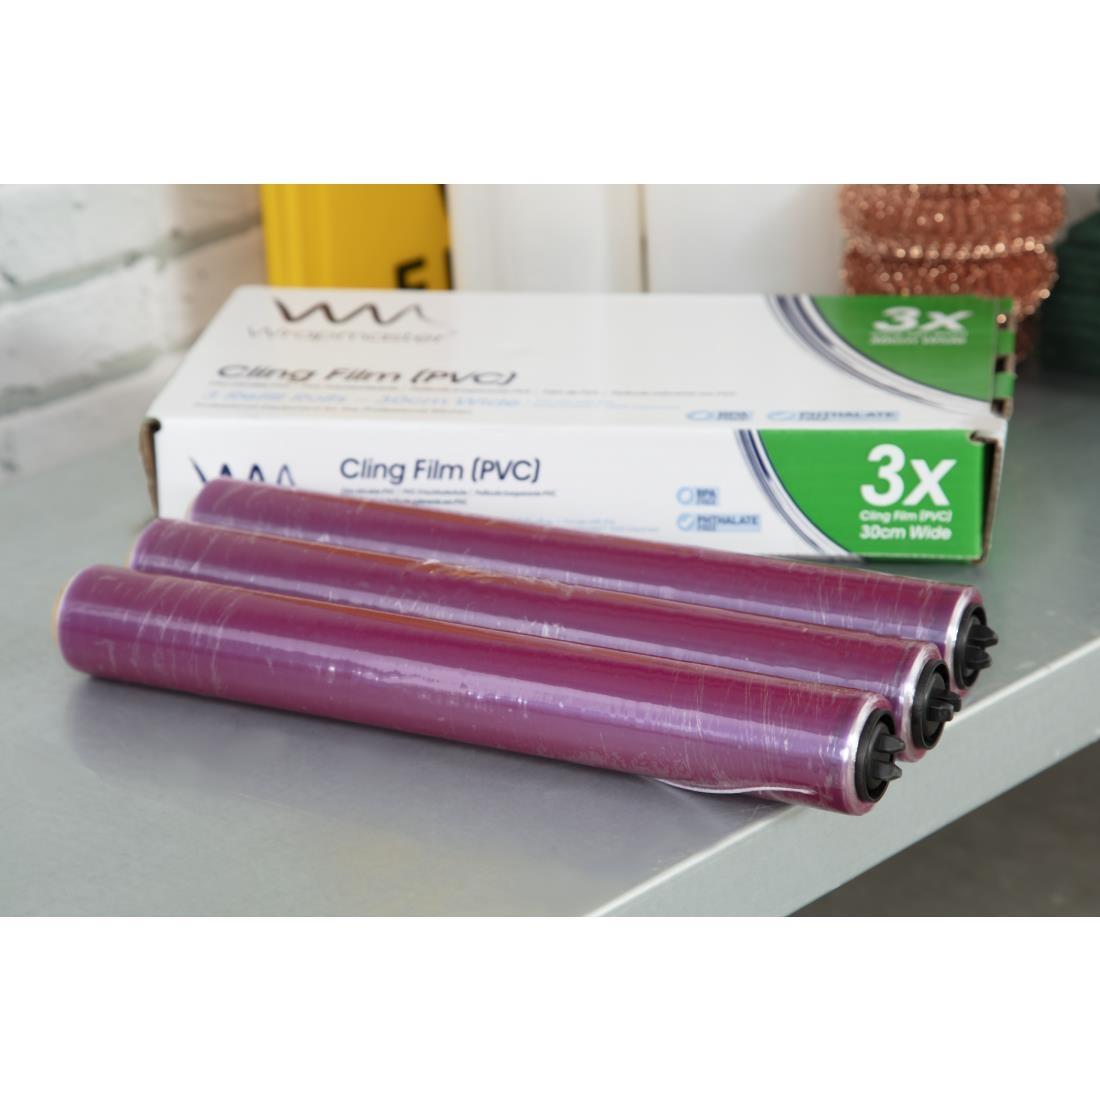 Wrapmaster Cling Film 300mm x 100m (Pack of 3) - CB624  - 5